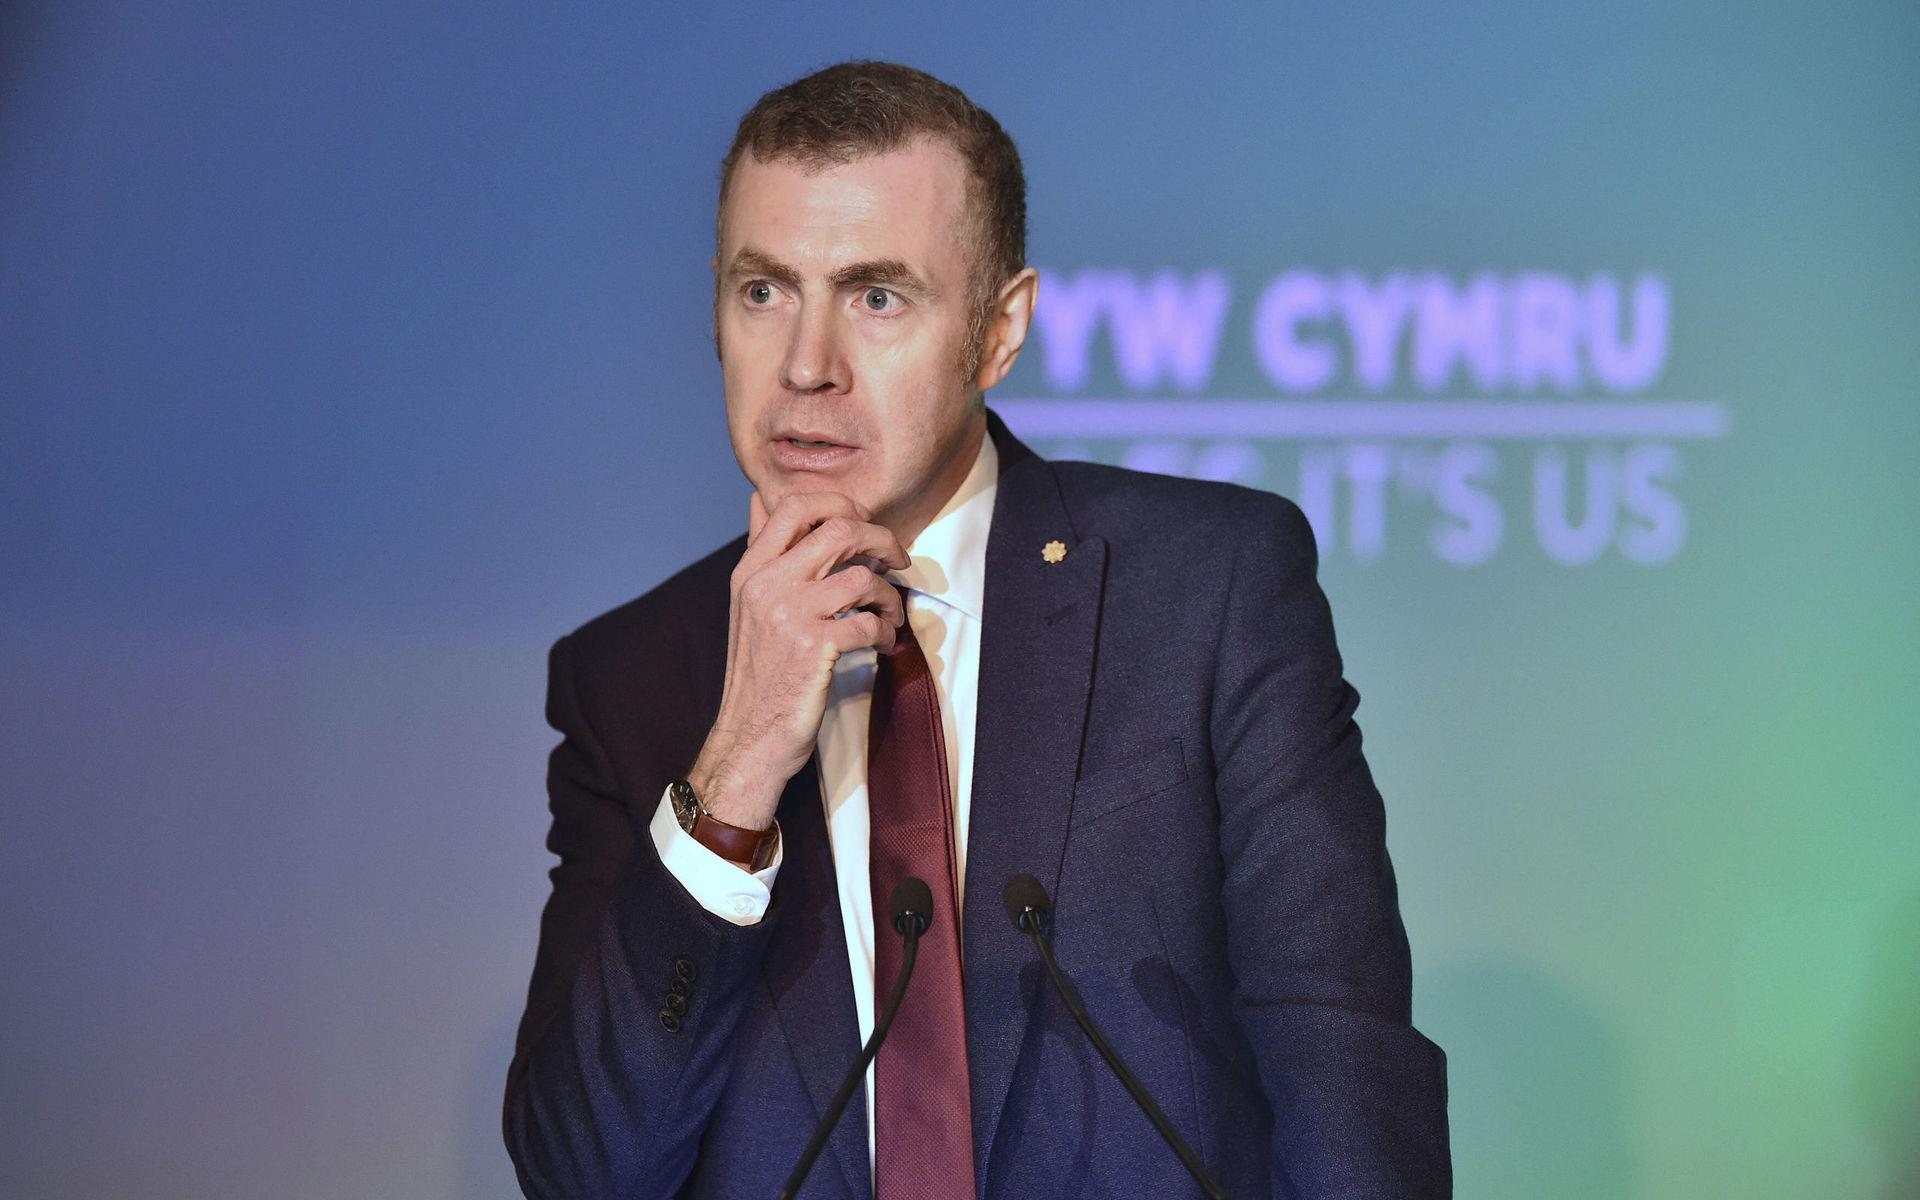 Britain&apos;s Plaid Cymru leader Adam Price speaks during the launch of his party&apos;s manifesto in Nantgarw, Wales, Friday Nov. 22, 2019, ahead of the general election on Dec. 12. (Ben Birchall/PA via AP)  LBJ808